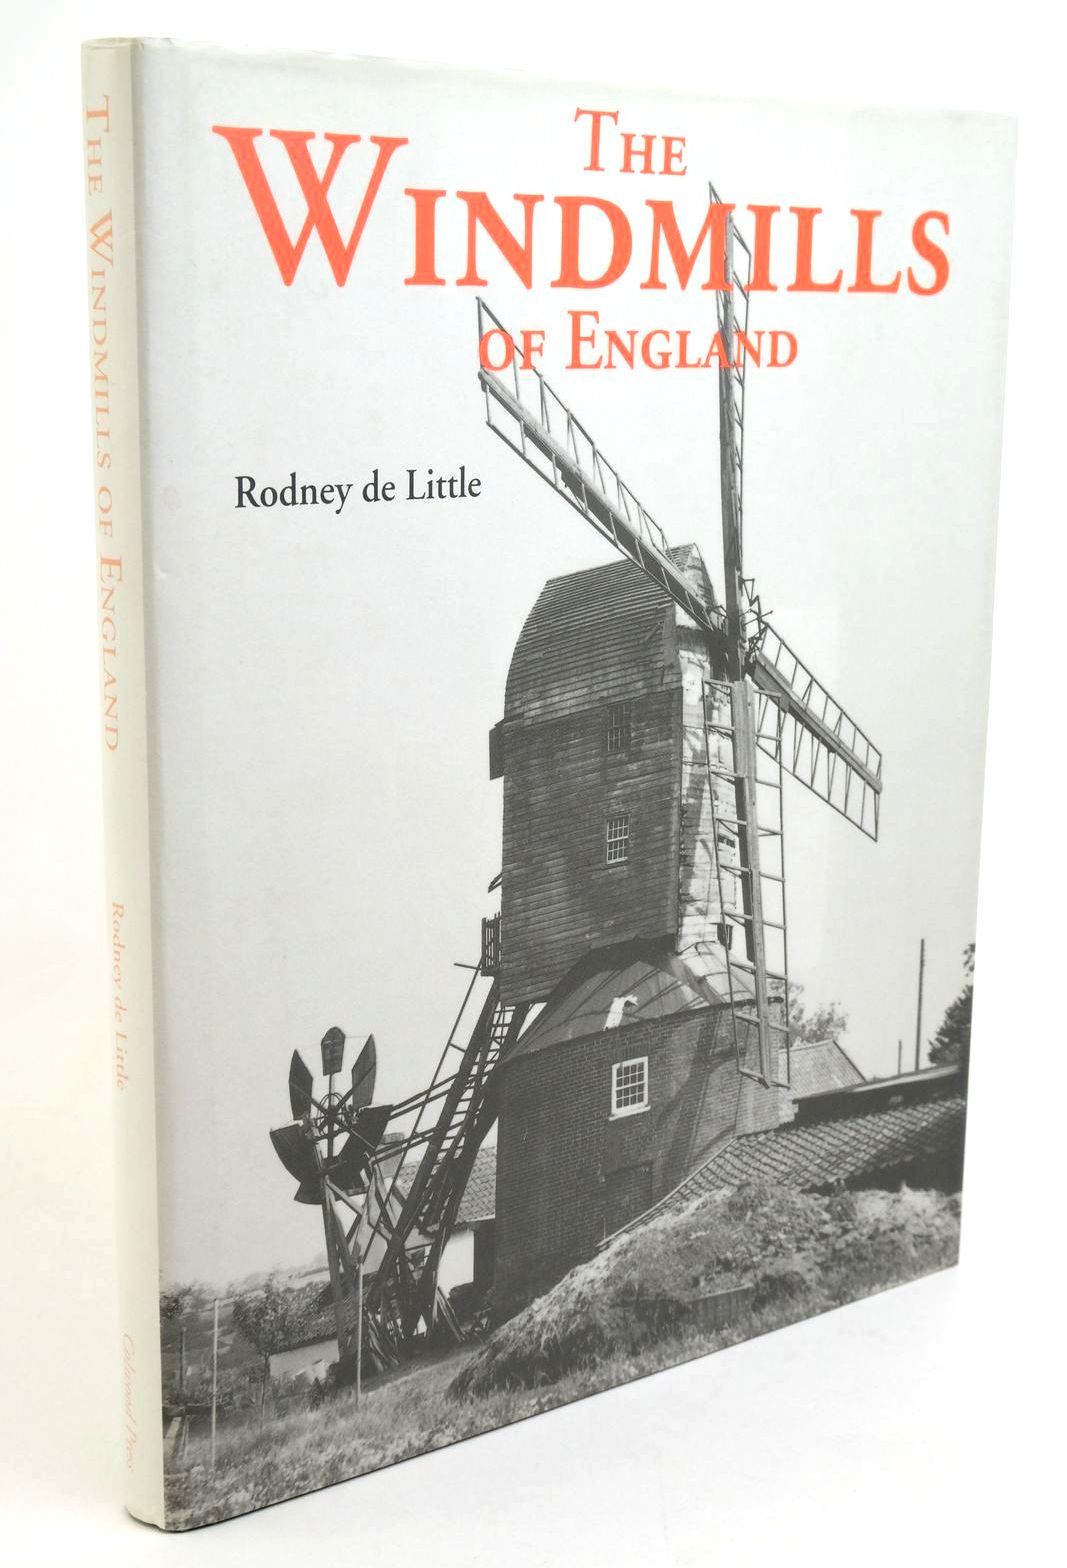 Photo of THE WINDMILLS OF ENGLAND written by De Little, Rodney published by Colwood Press Ltd (STOCK CODE: 1322443)  for sale by Stella & Rose's Books